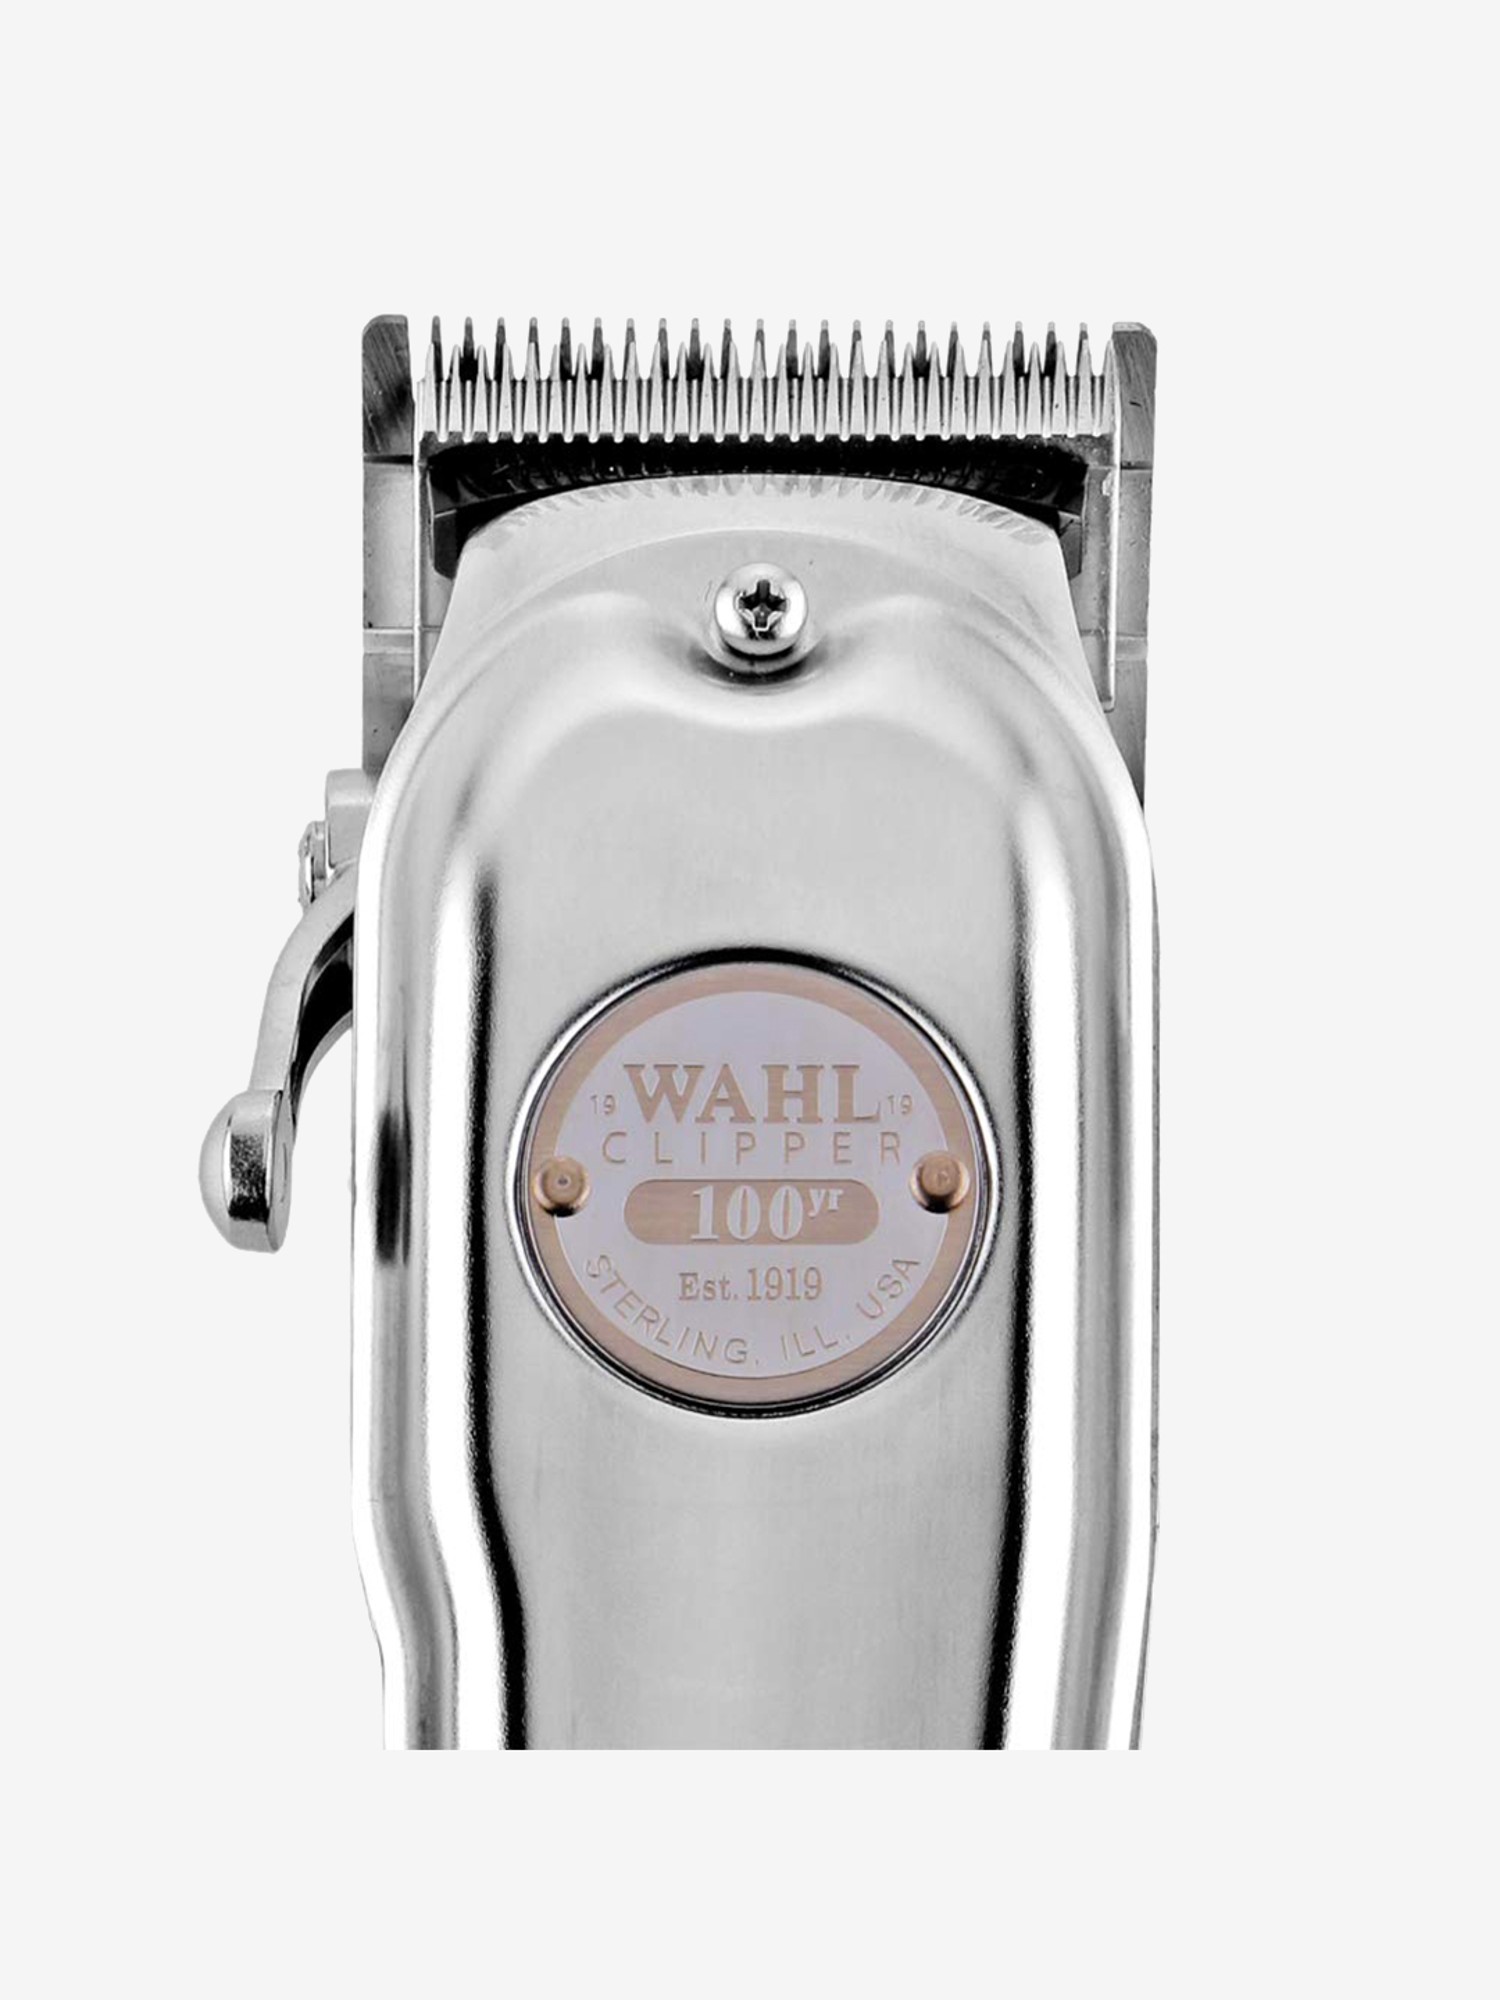 Машинка barber. Машинка Wahl 100-year Clipper. Wahl 1919 Clipper машинка. Wahl 1919 100. Wahl 100 year Cordless Clipper 1919.